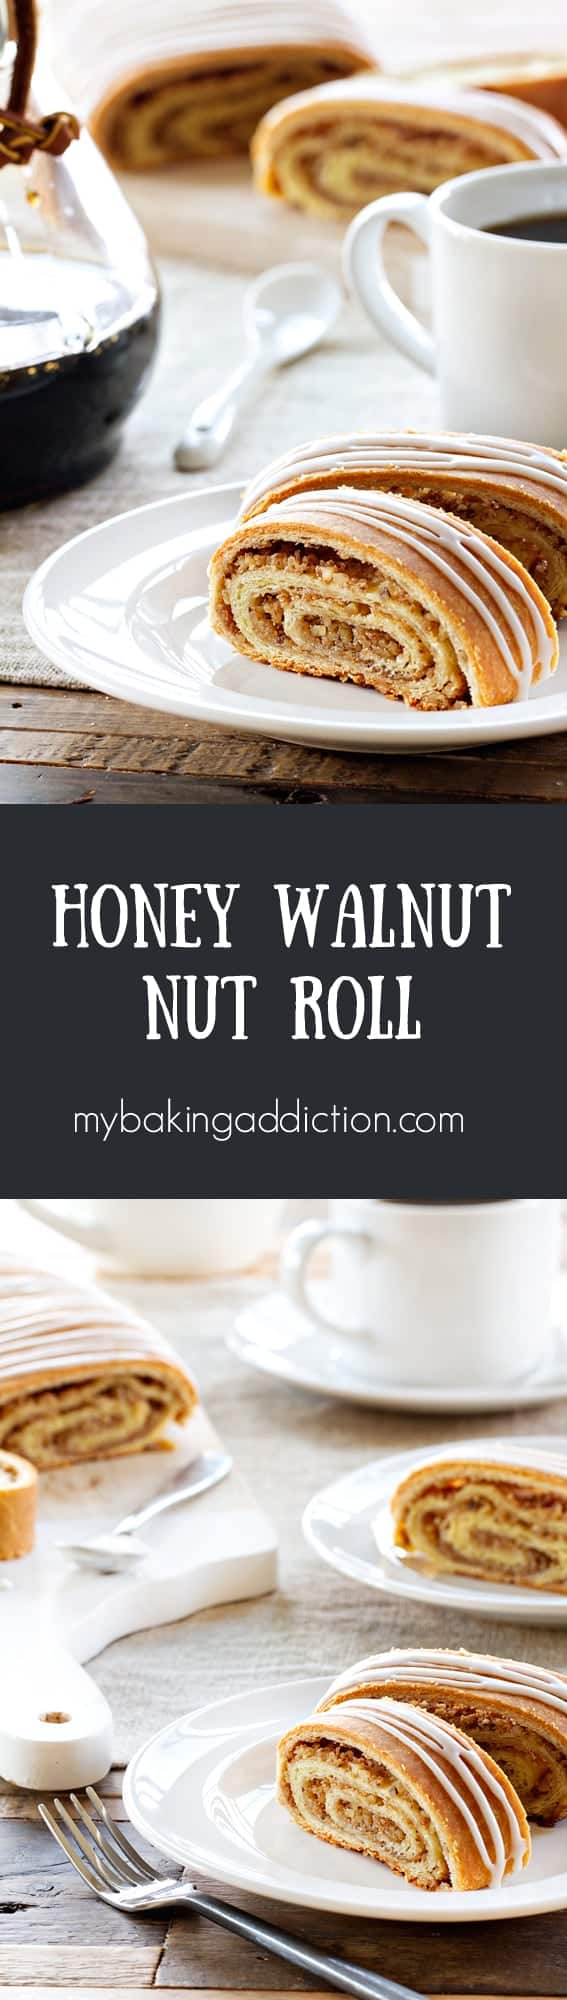 Honey Nut Rolls are filled with ground walnuts and sweet honey. They're so delicious and sure to become a new favorite!